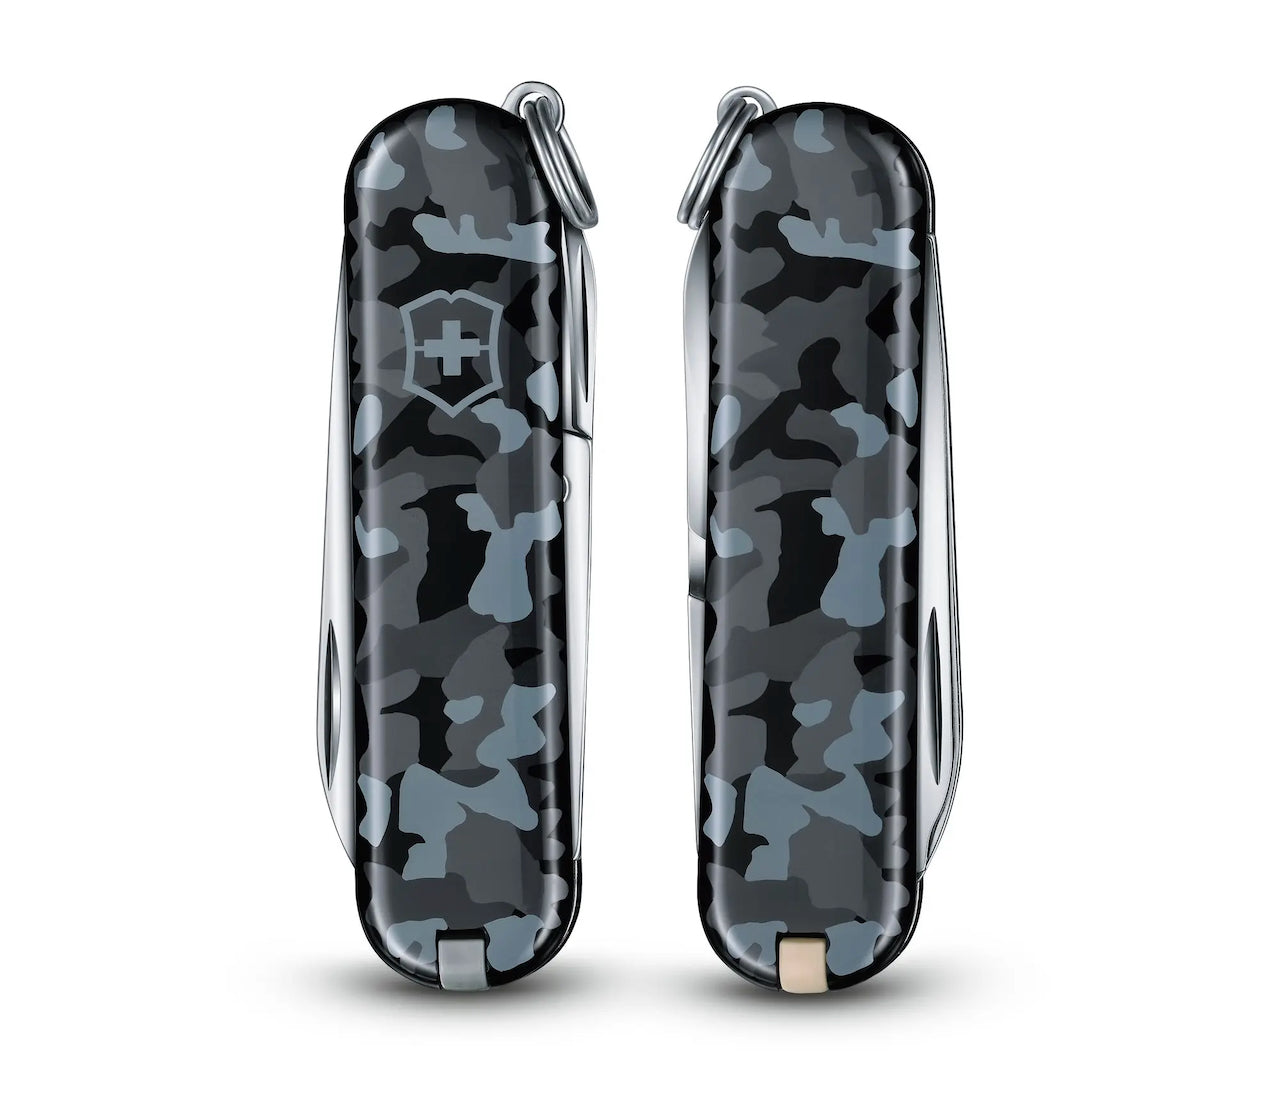 Victorinox 0.6223.942 Classic SD, 58 mm, Navy Camouflage 7 Functions